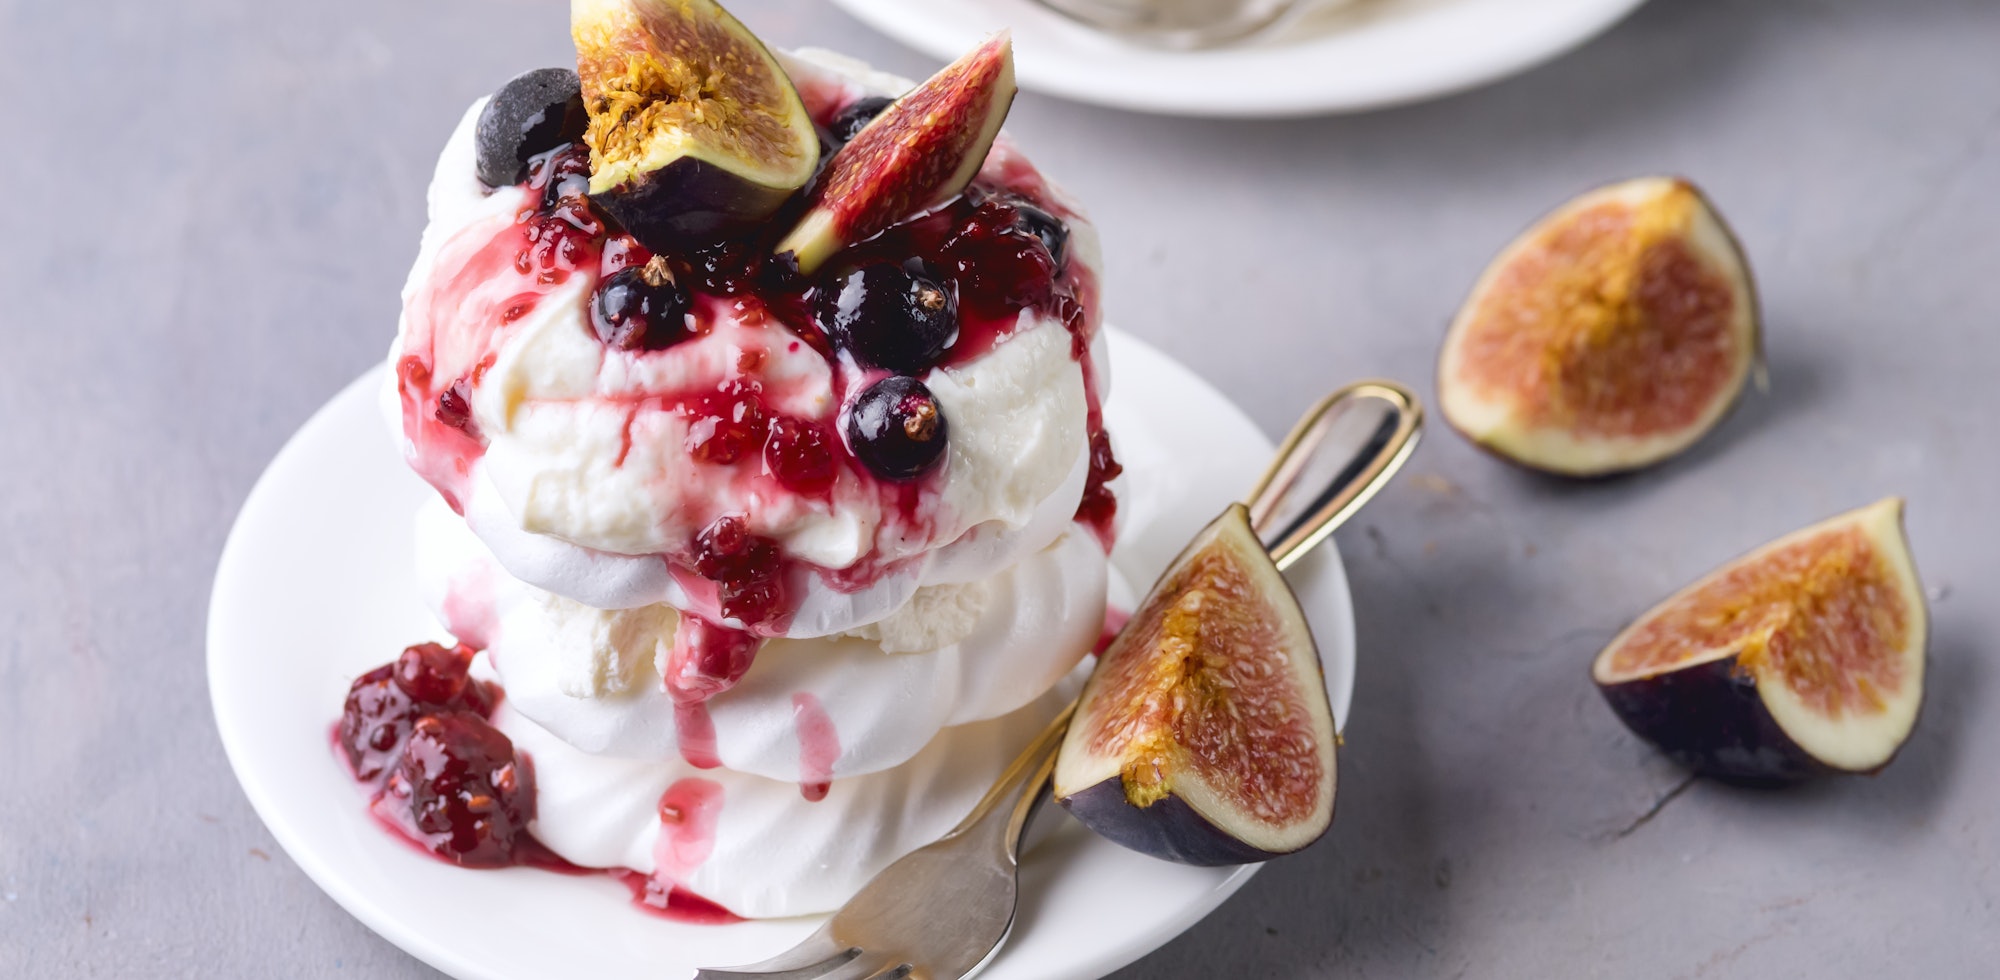 Mini Pavlova Cake with Figs and Berry Tasty Dessert Pavlova on White Plate White Cup of Tea and Whit...